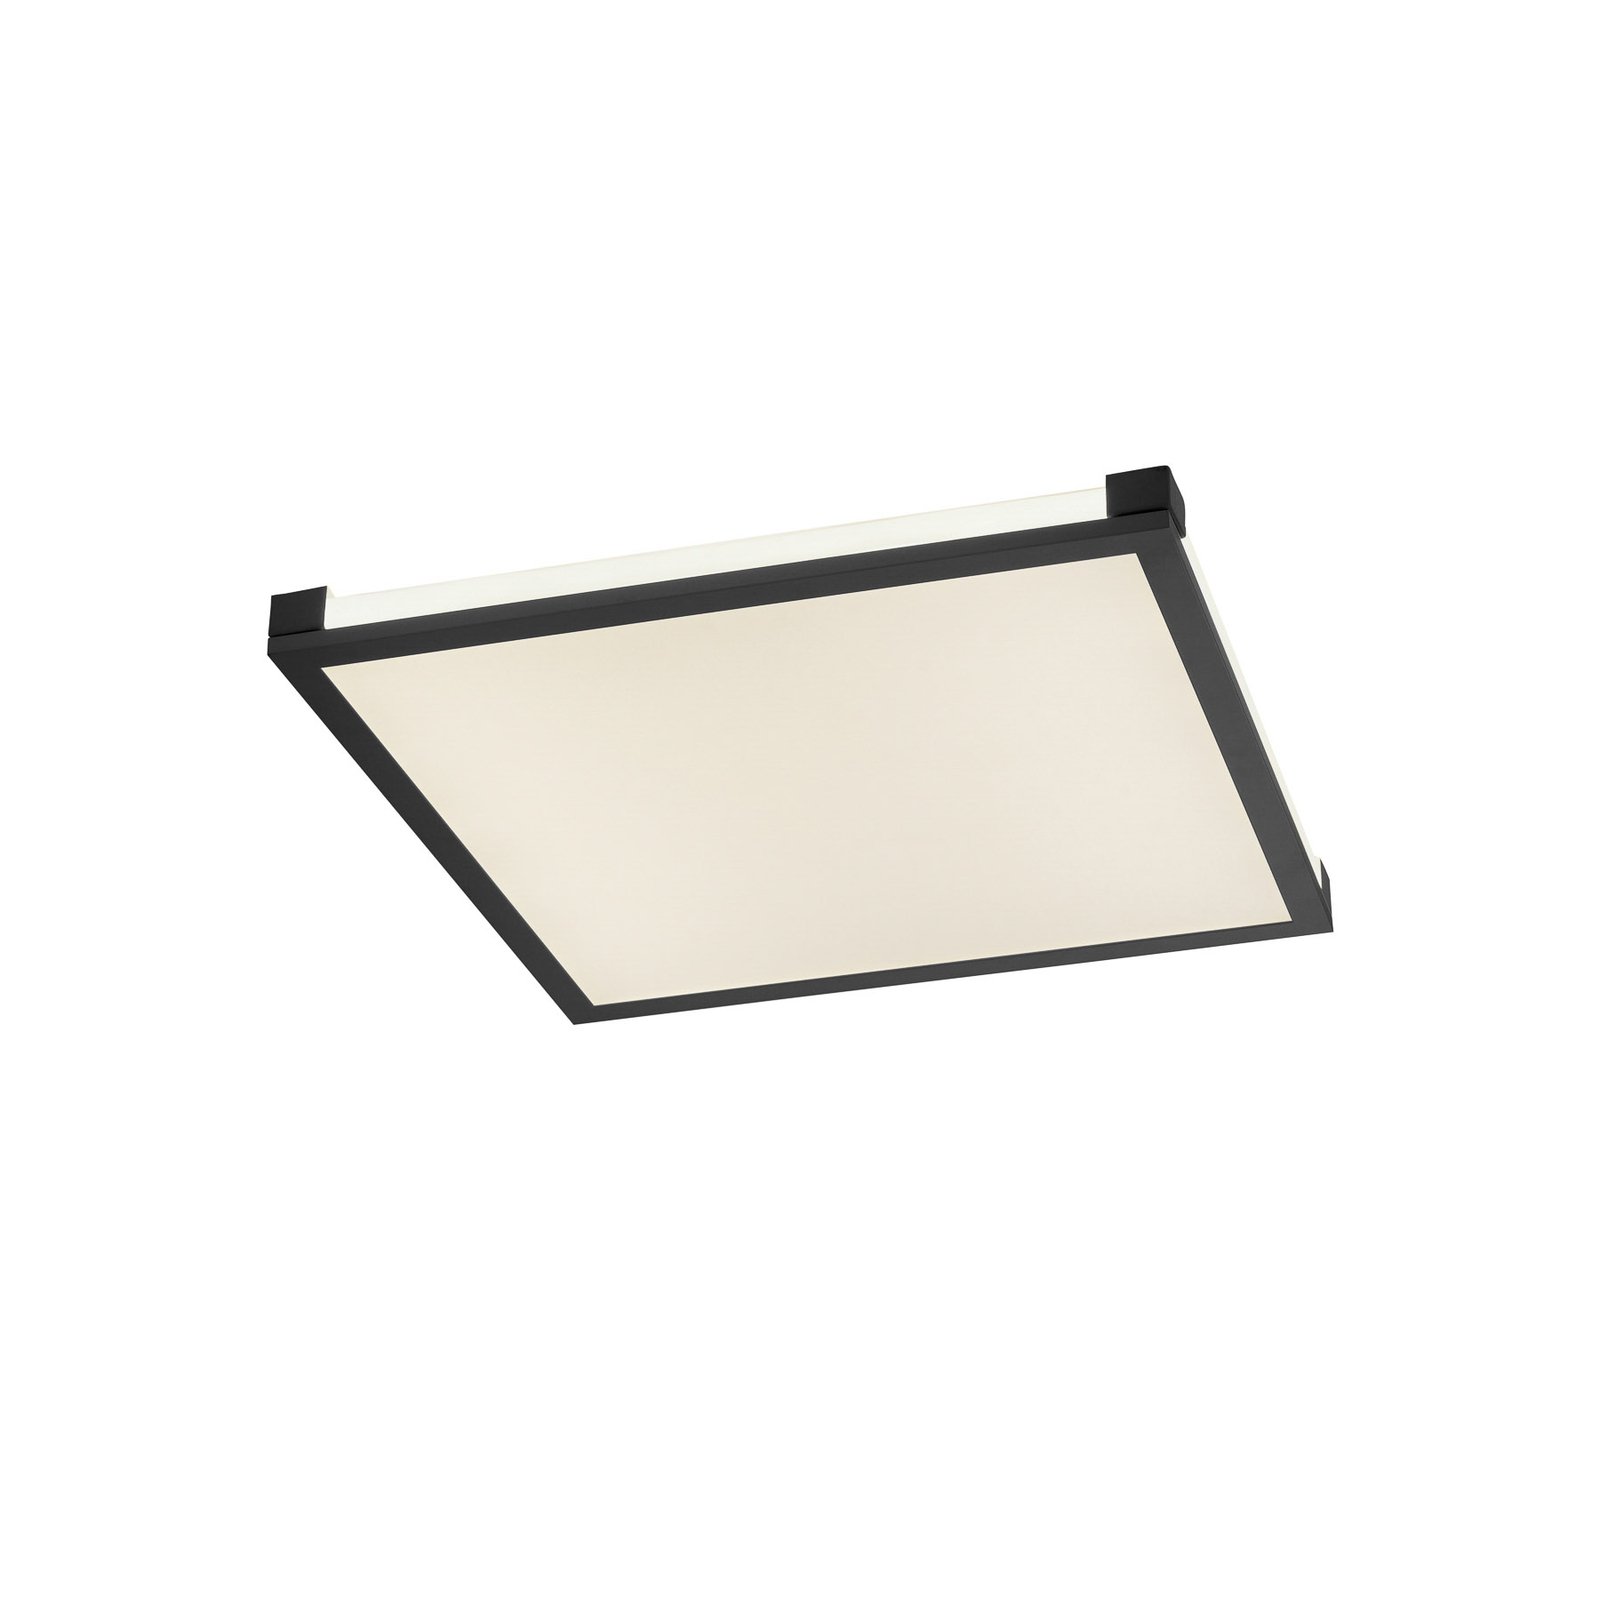 Mario LED ceiling lamp 45 x 45 cm, dimmable, RGBW